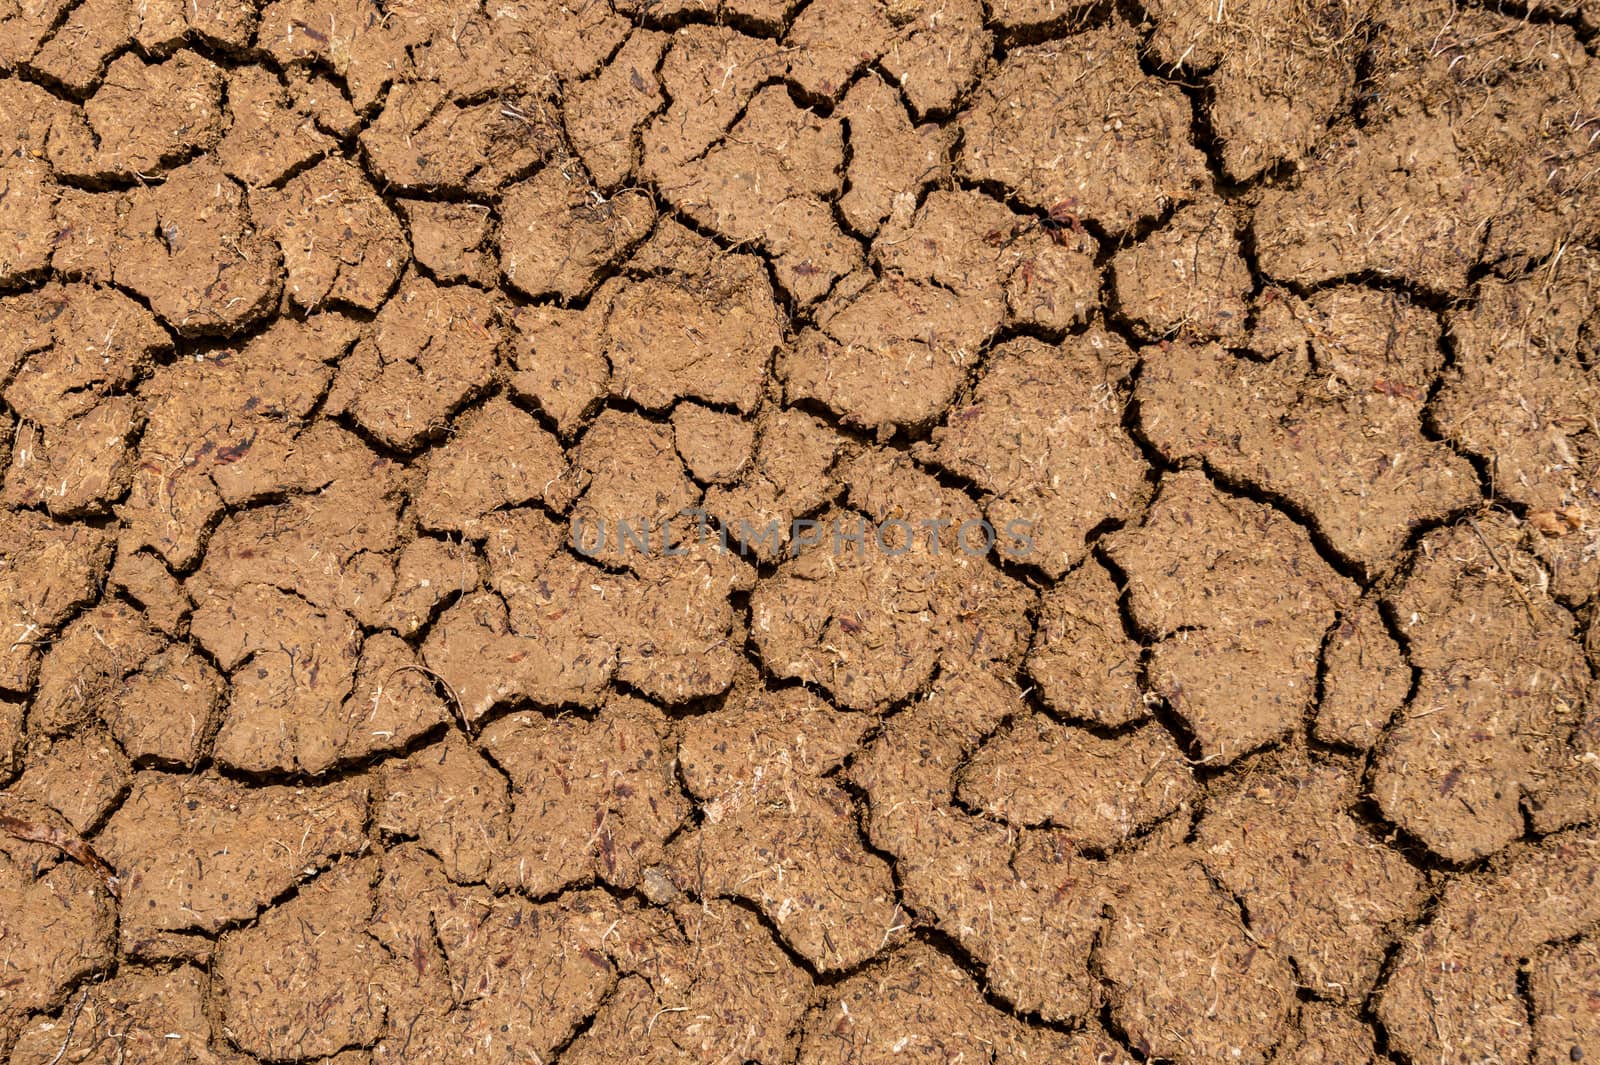 Texture of dry and dehydrated soil cracks